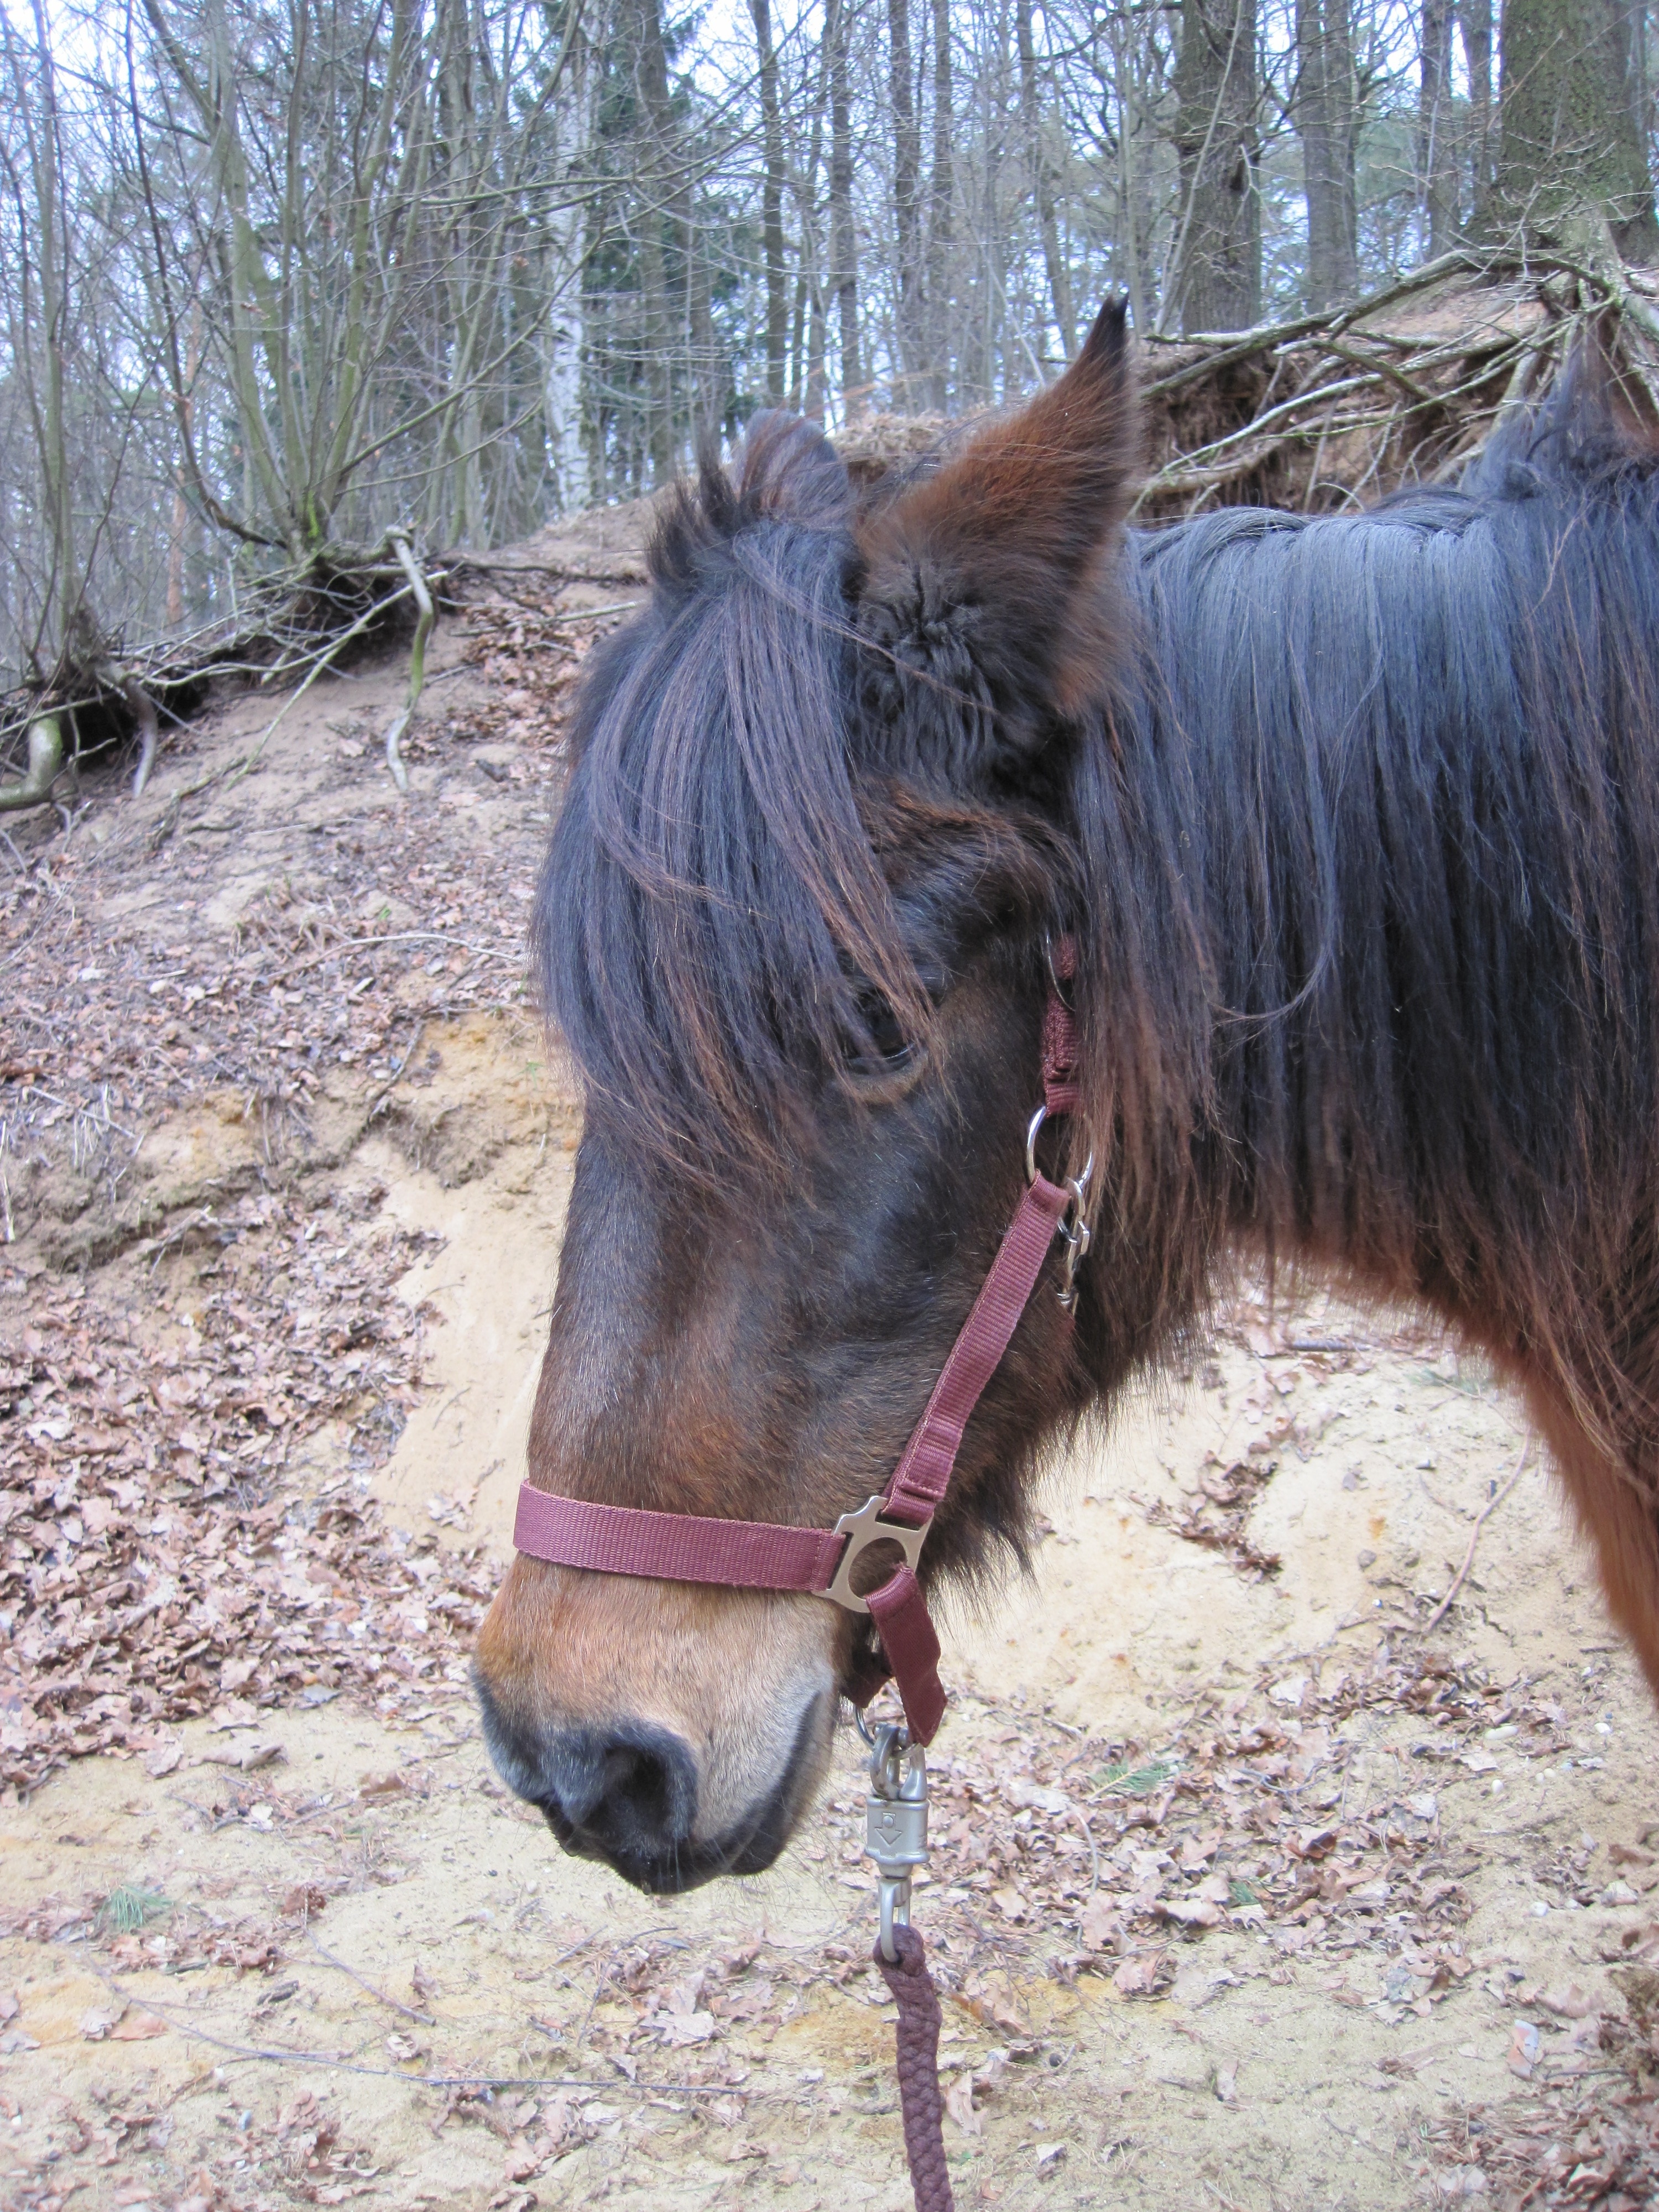 brown coated horse